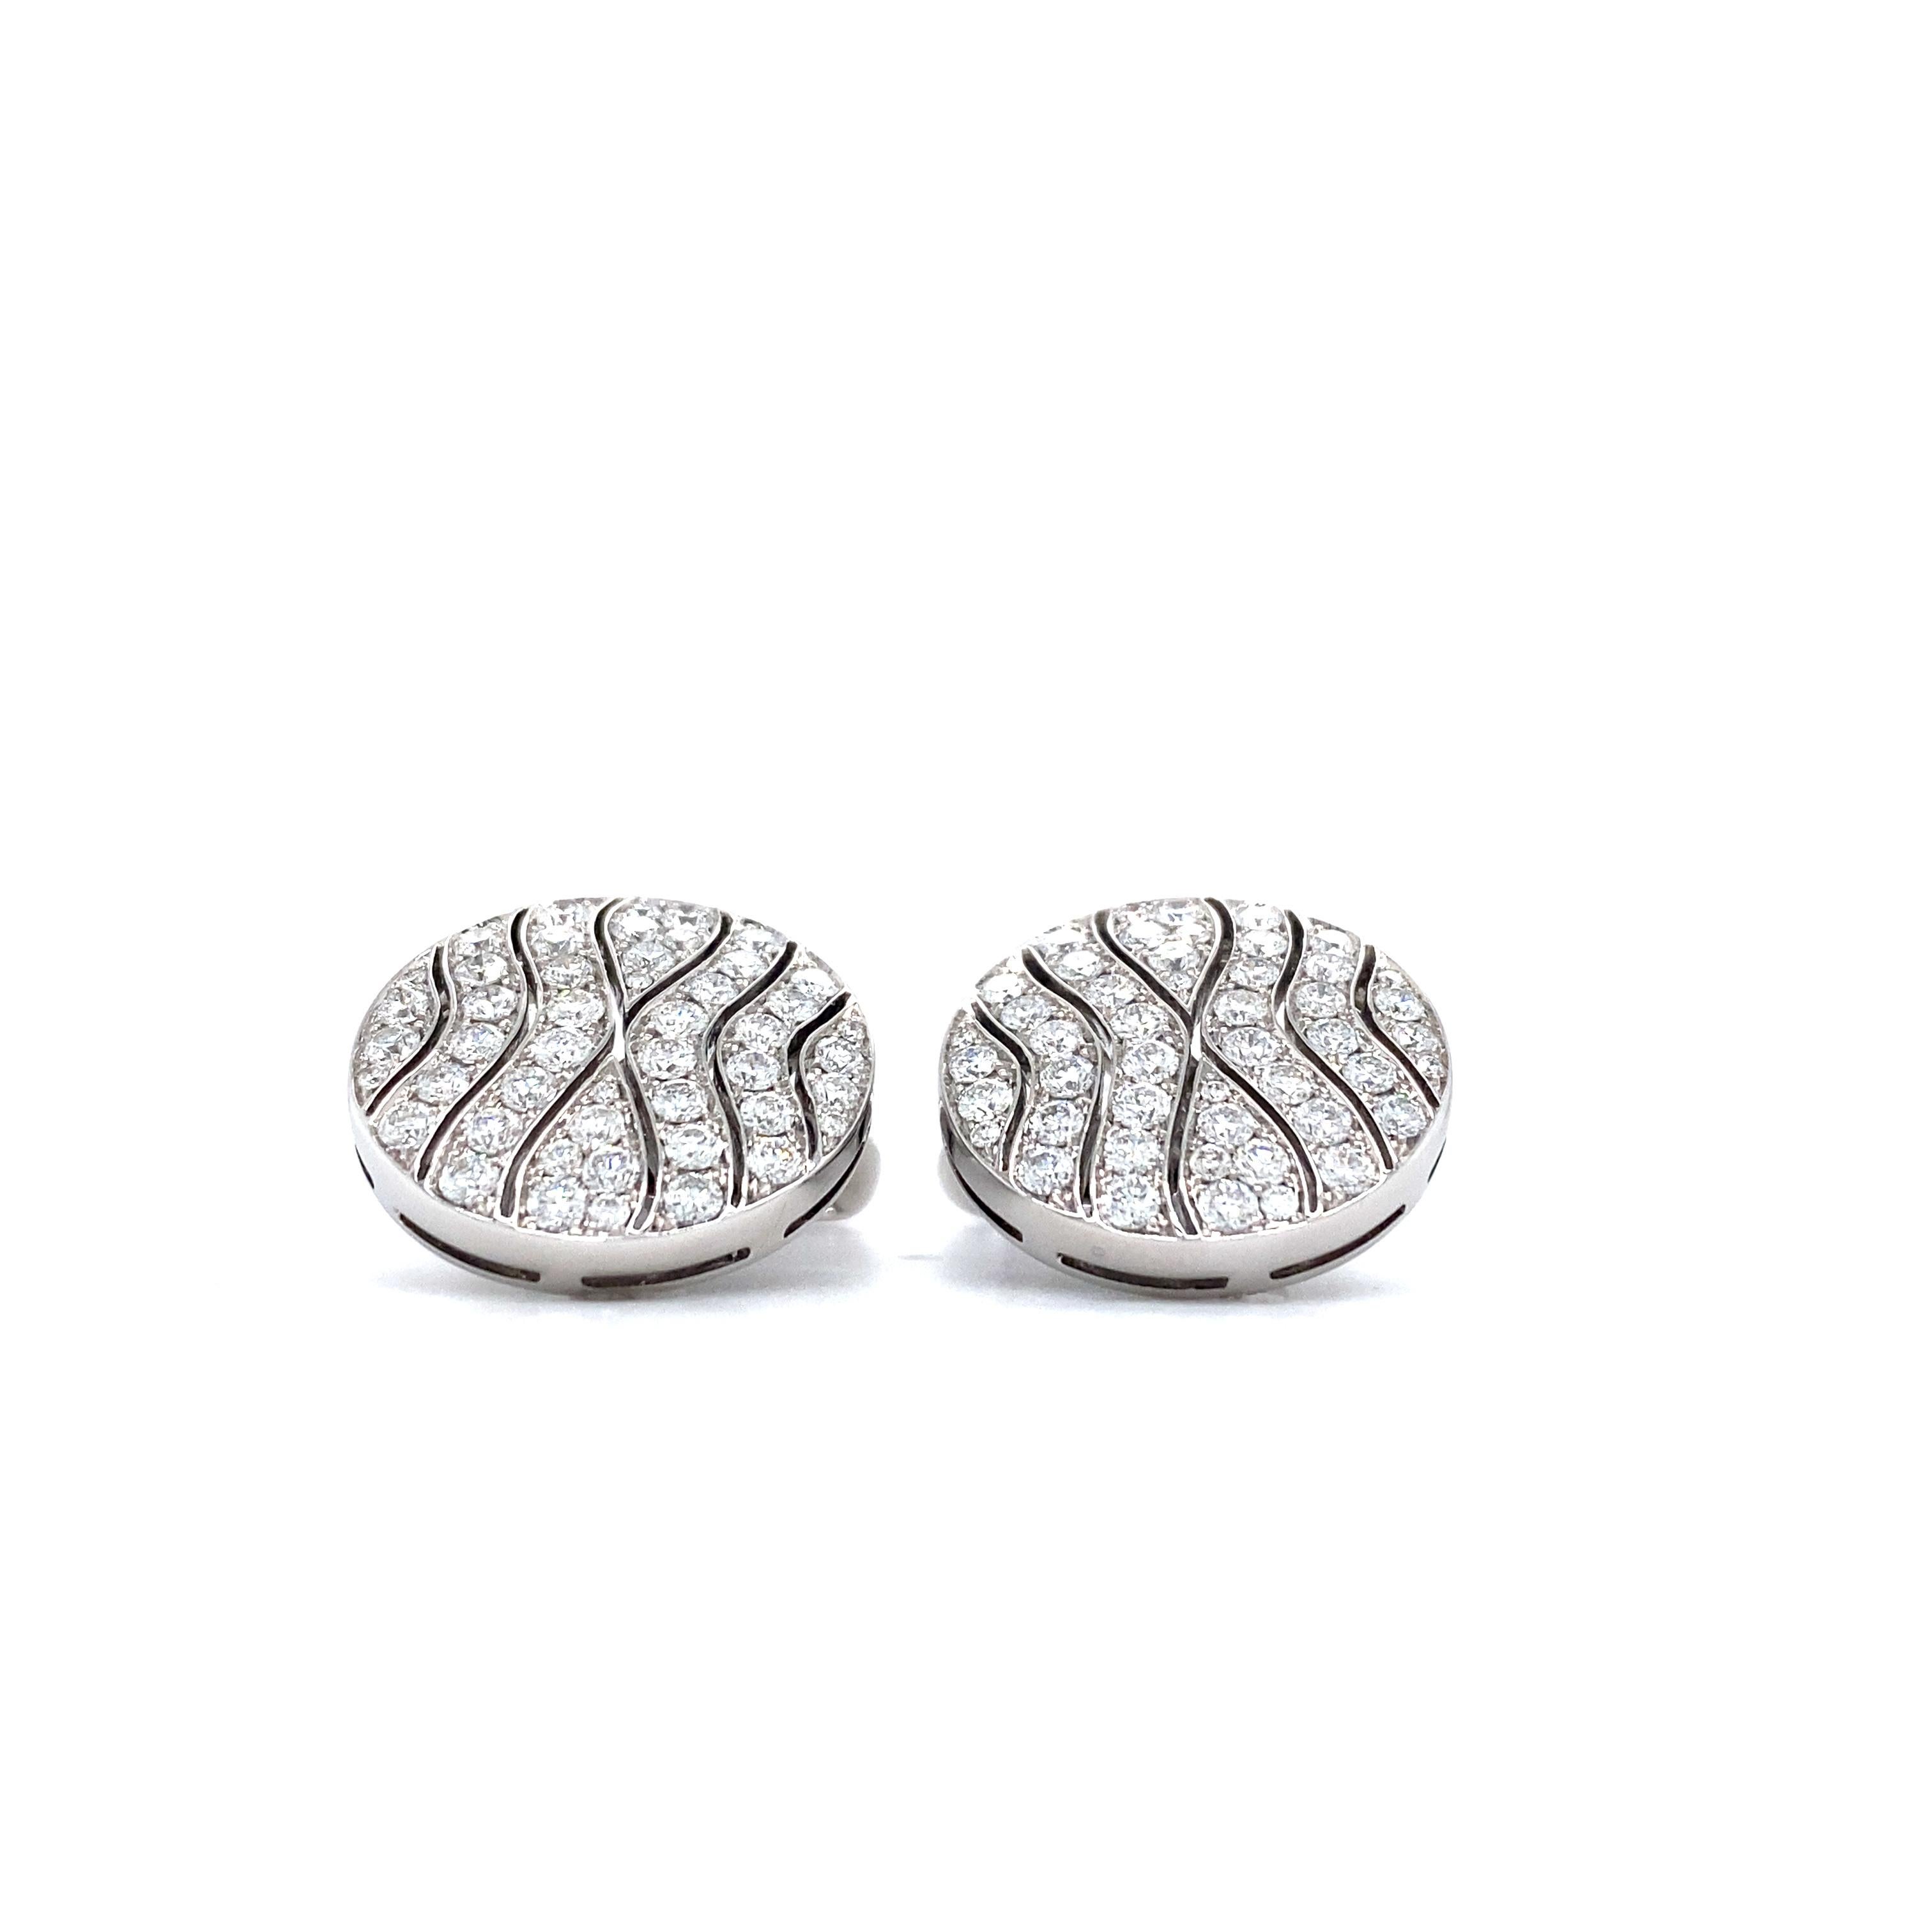 Victor Mayer Round Cufflinks, 18k White Gold, Diamonds 2.45 ct, G VS, Diameter 18.7 mm

About the creator Victor Mayer
Victor Mayer is internationally renowned for elegant timeless designs and unrivalled expertise in historic craftsmanship. Lovers